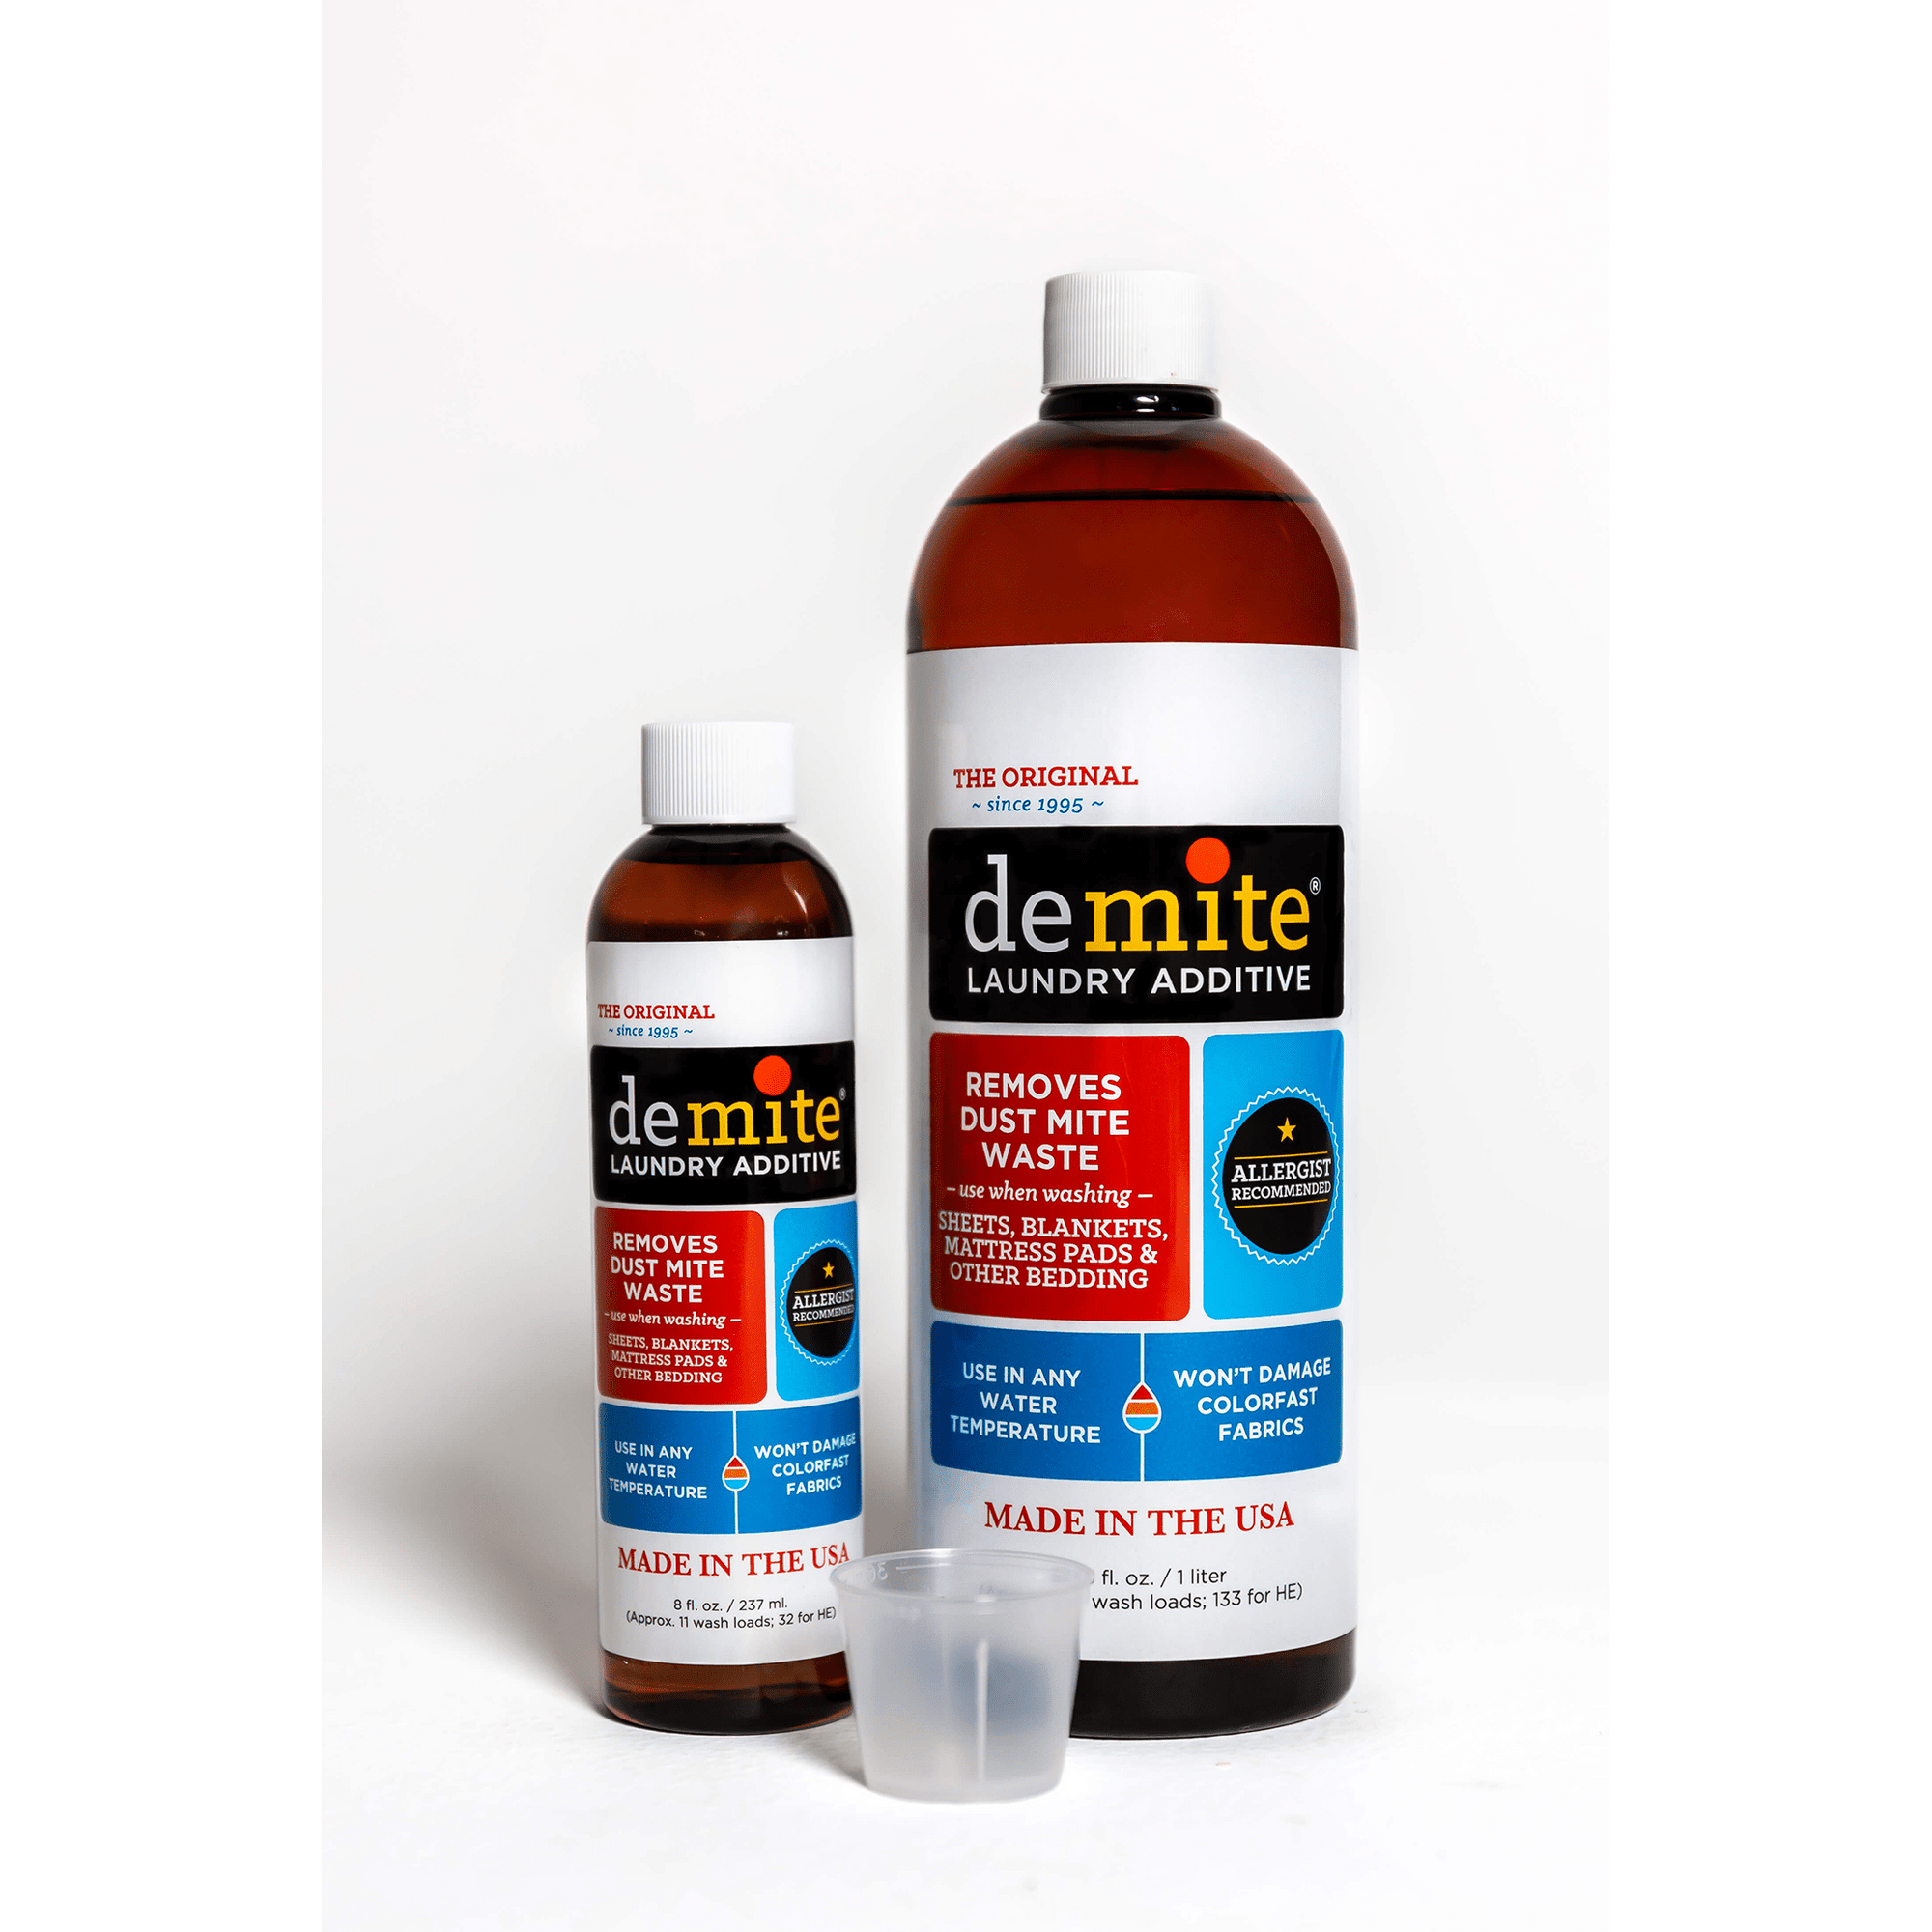 De-mite laundry additive eliminates dust mite waste allergens in bedding and washable clothing that laundering in regular detergent alone does not do.